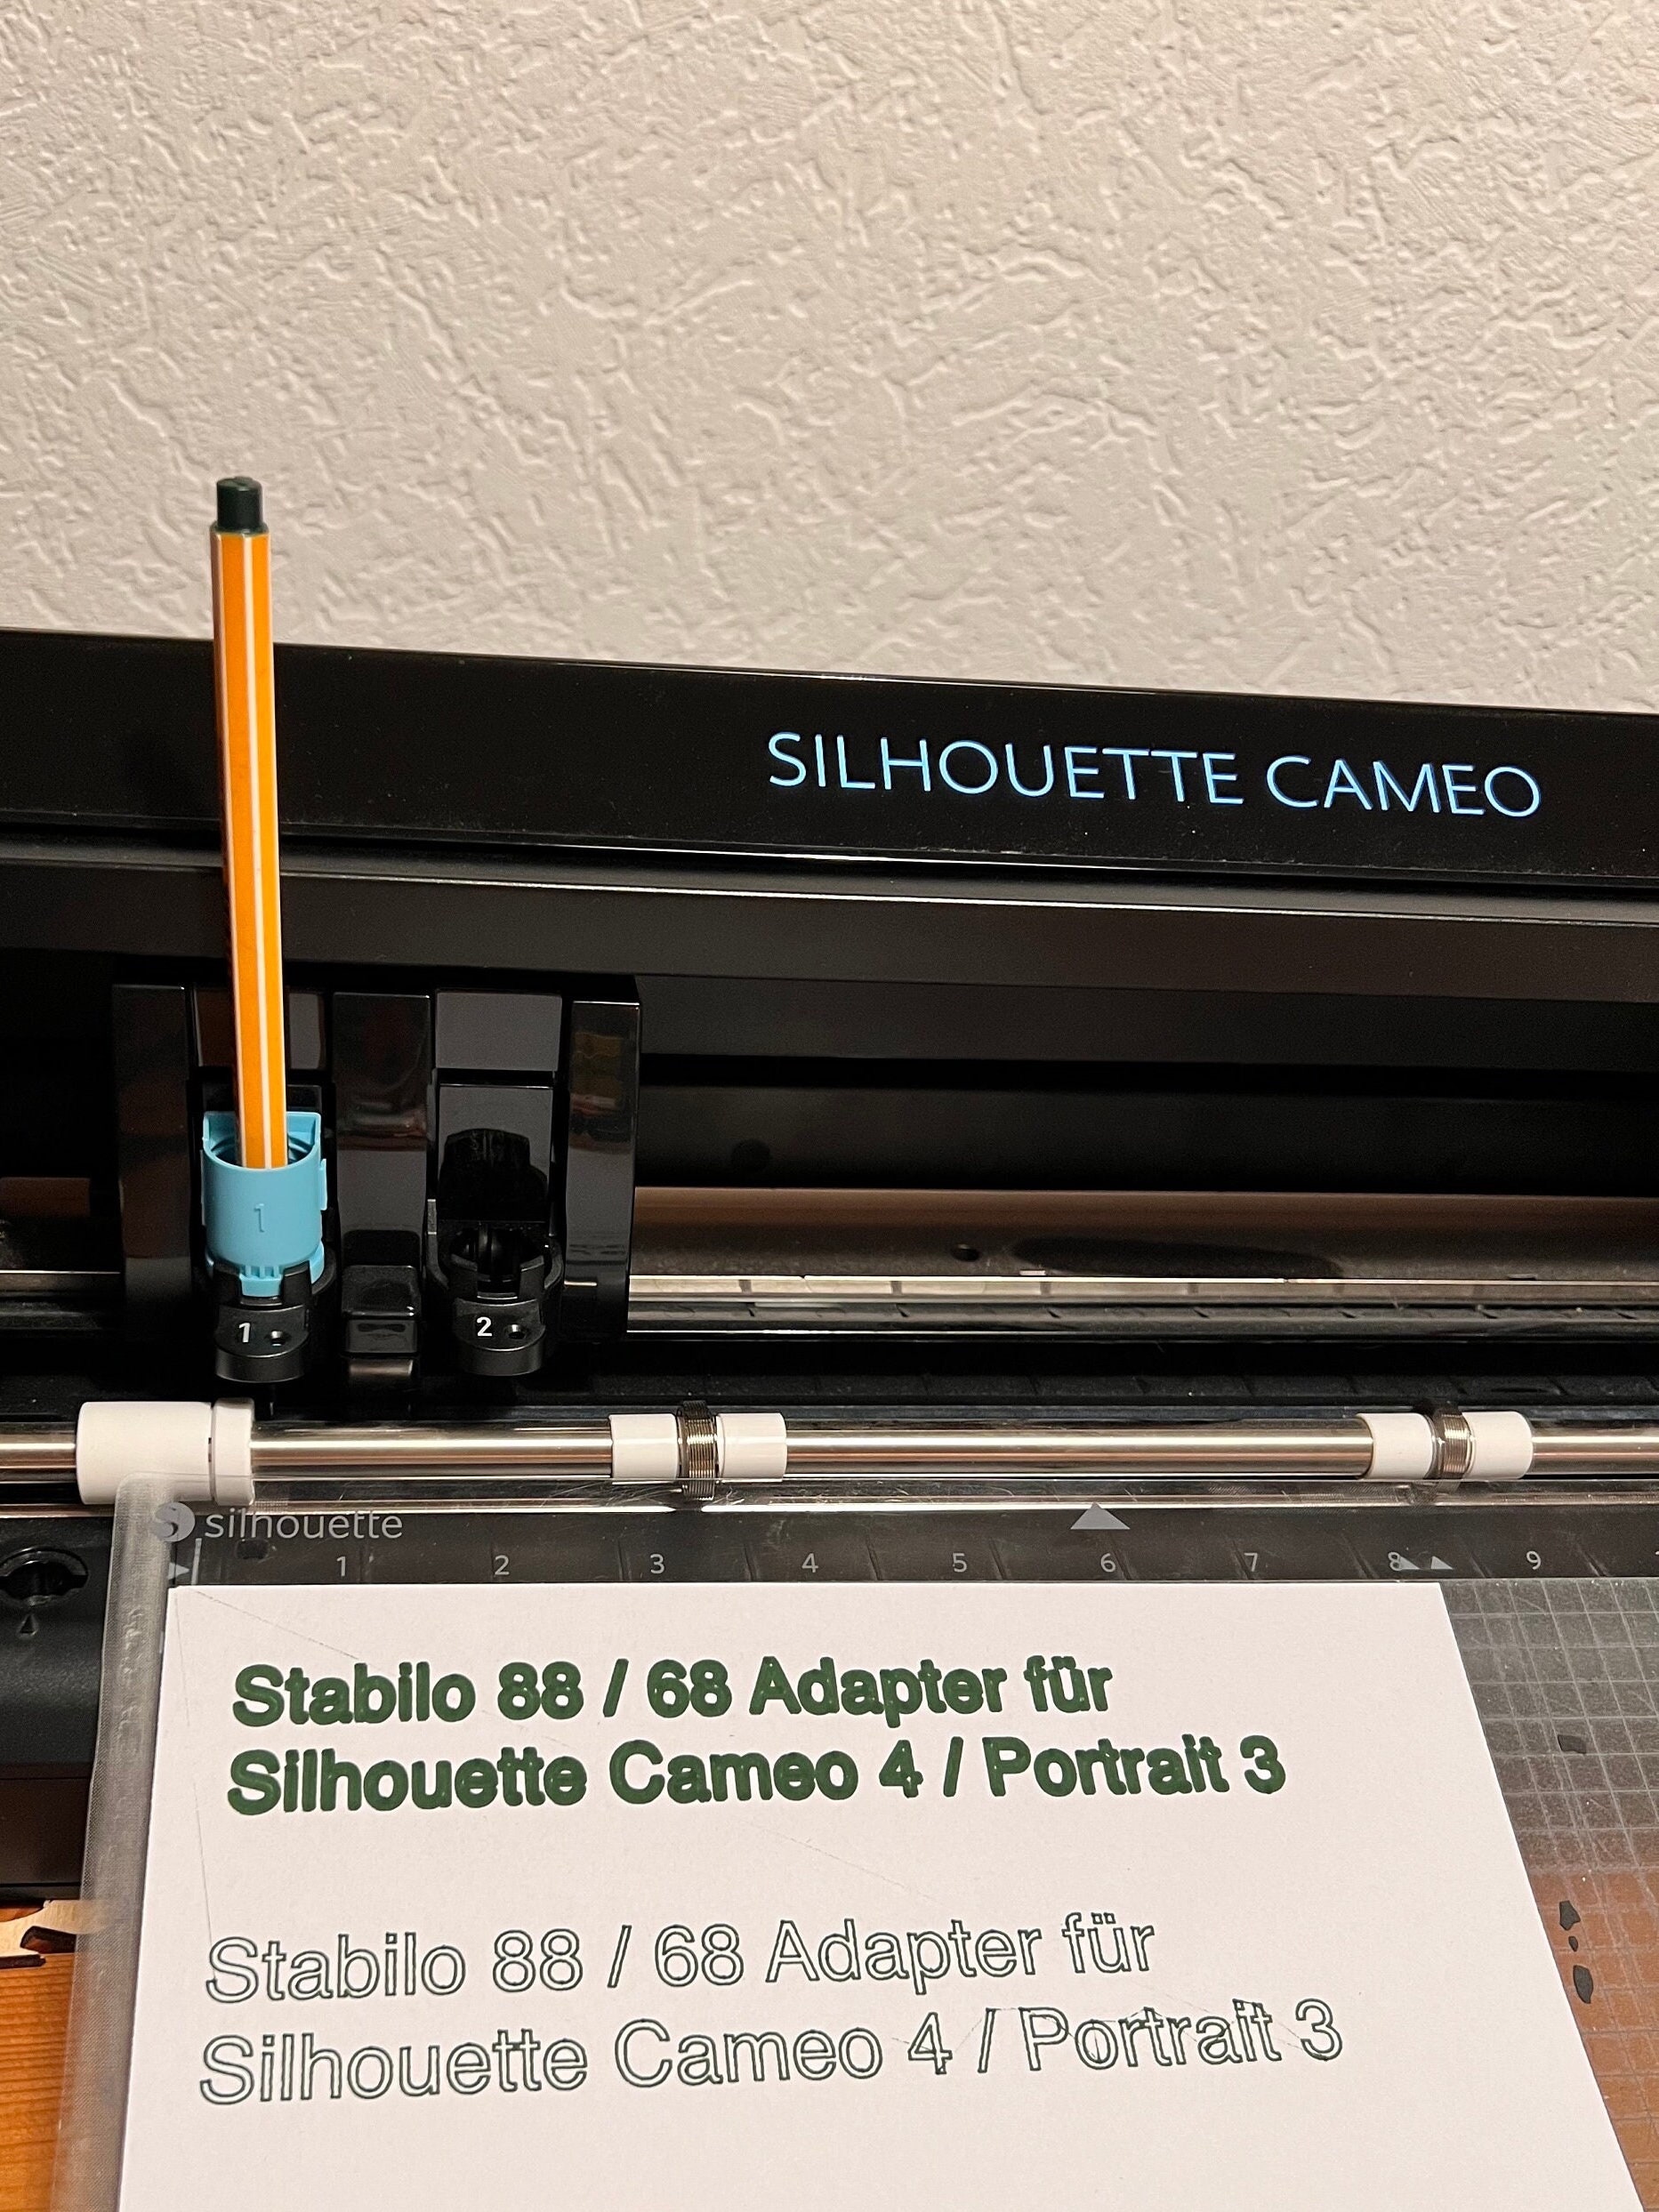 How to Use Your Silhouette Cameo or Silhouette Portrait - Start Here!